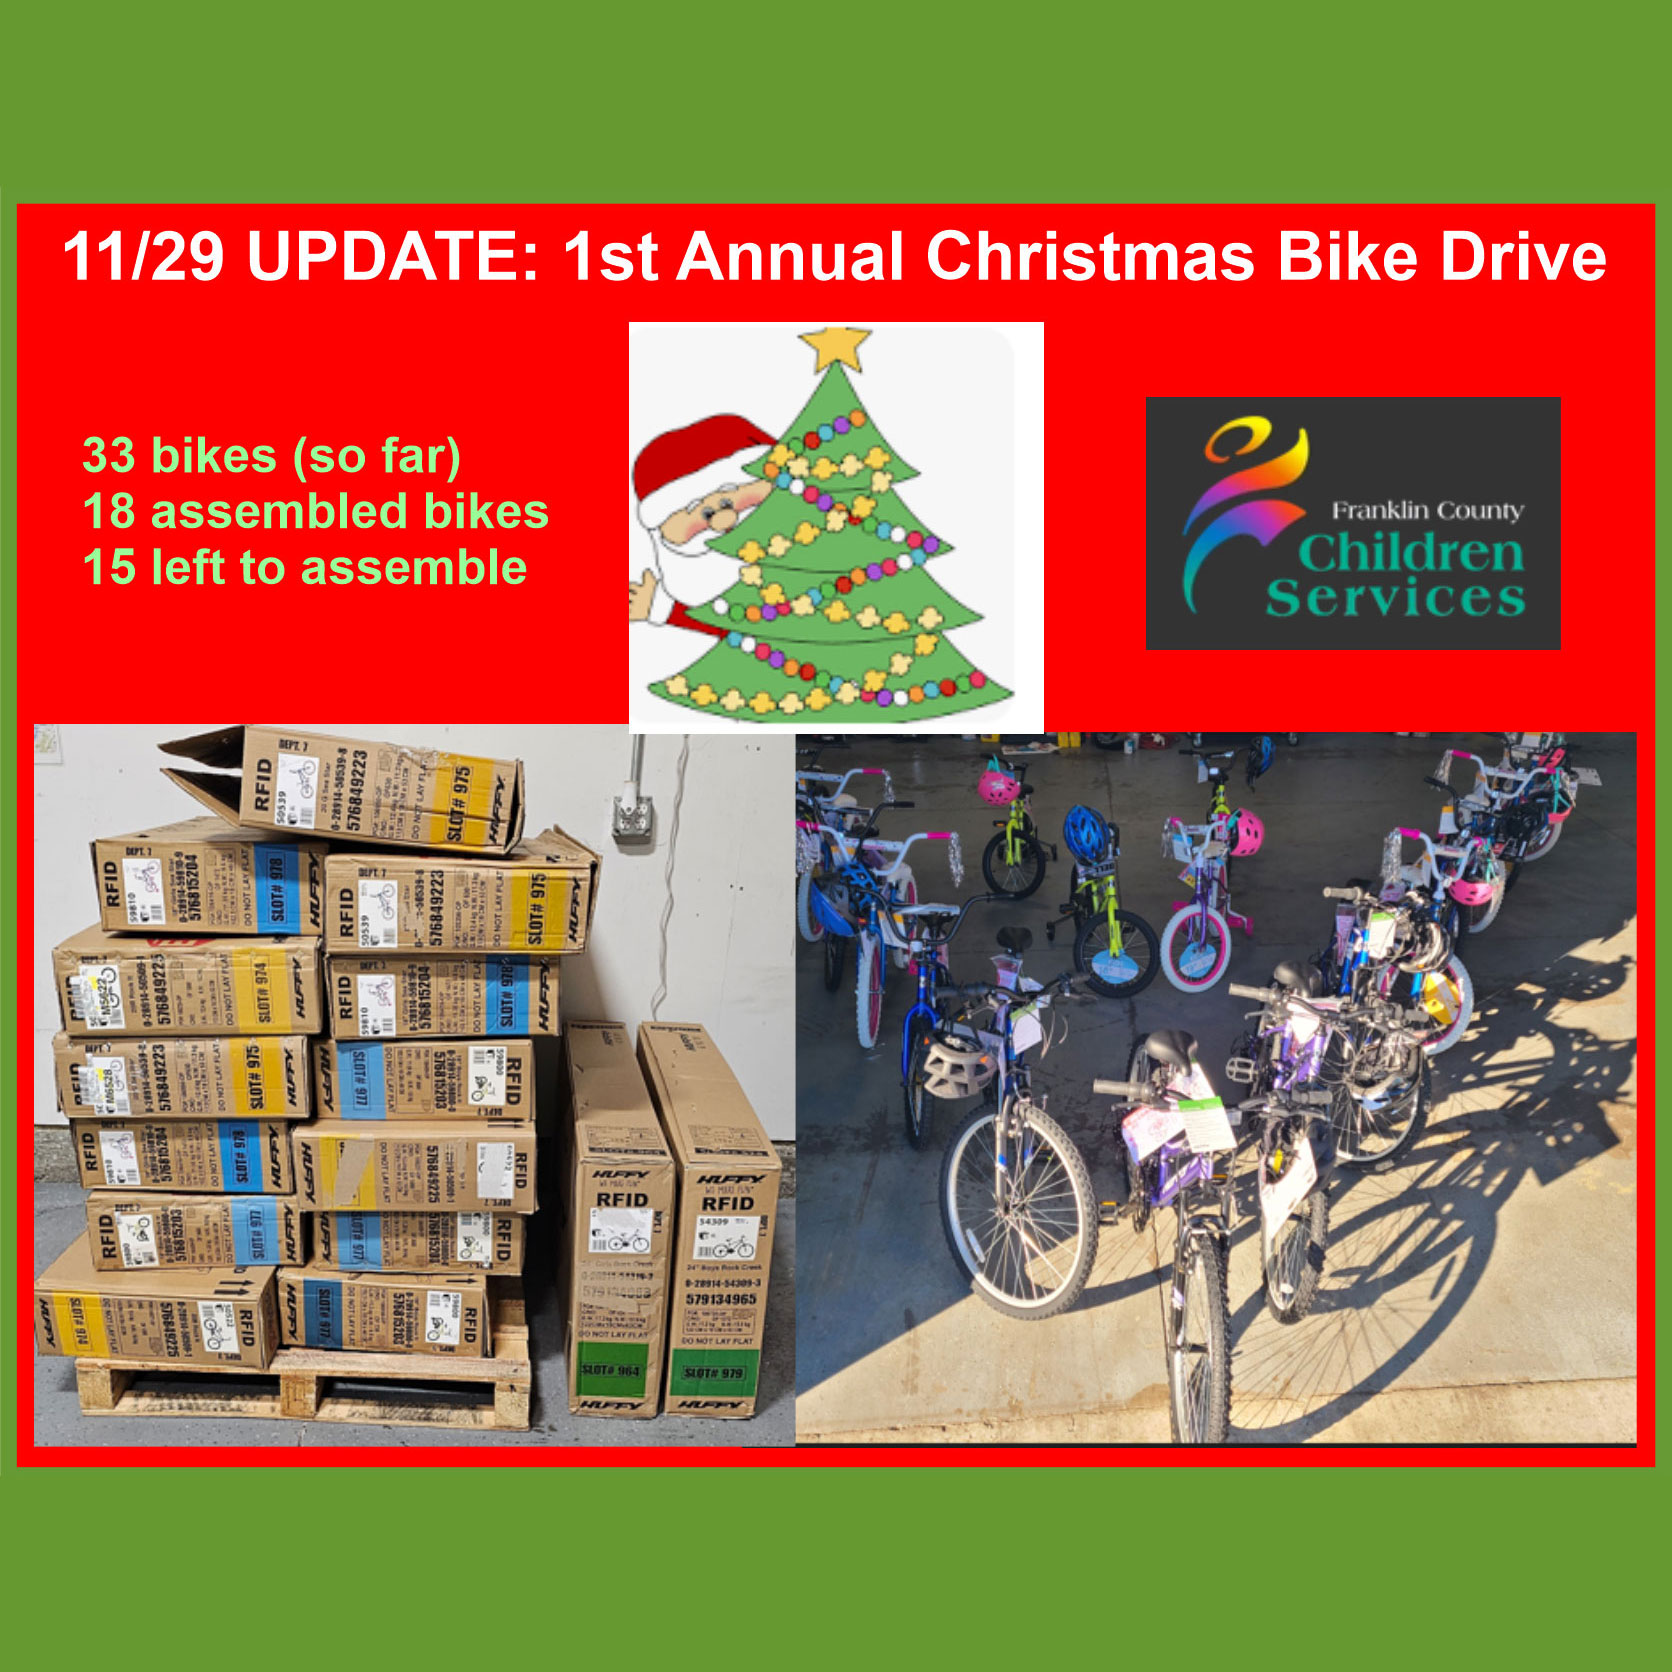 TimeSavers Courier Service - 1st Annual Holiday Bike Drive!